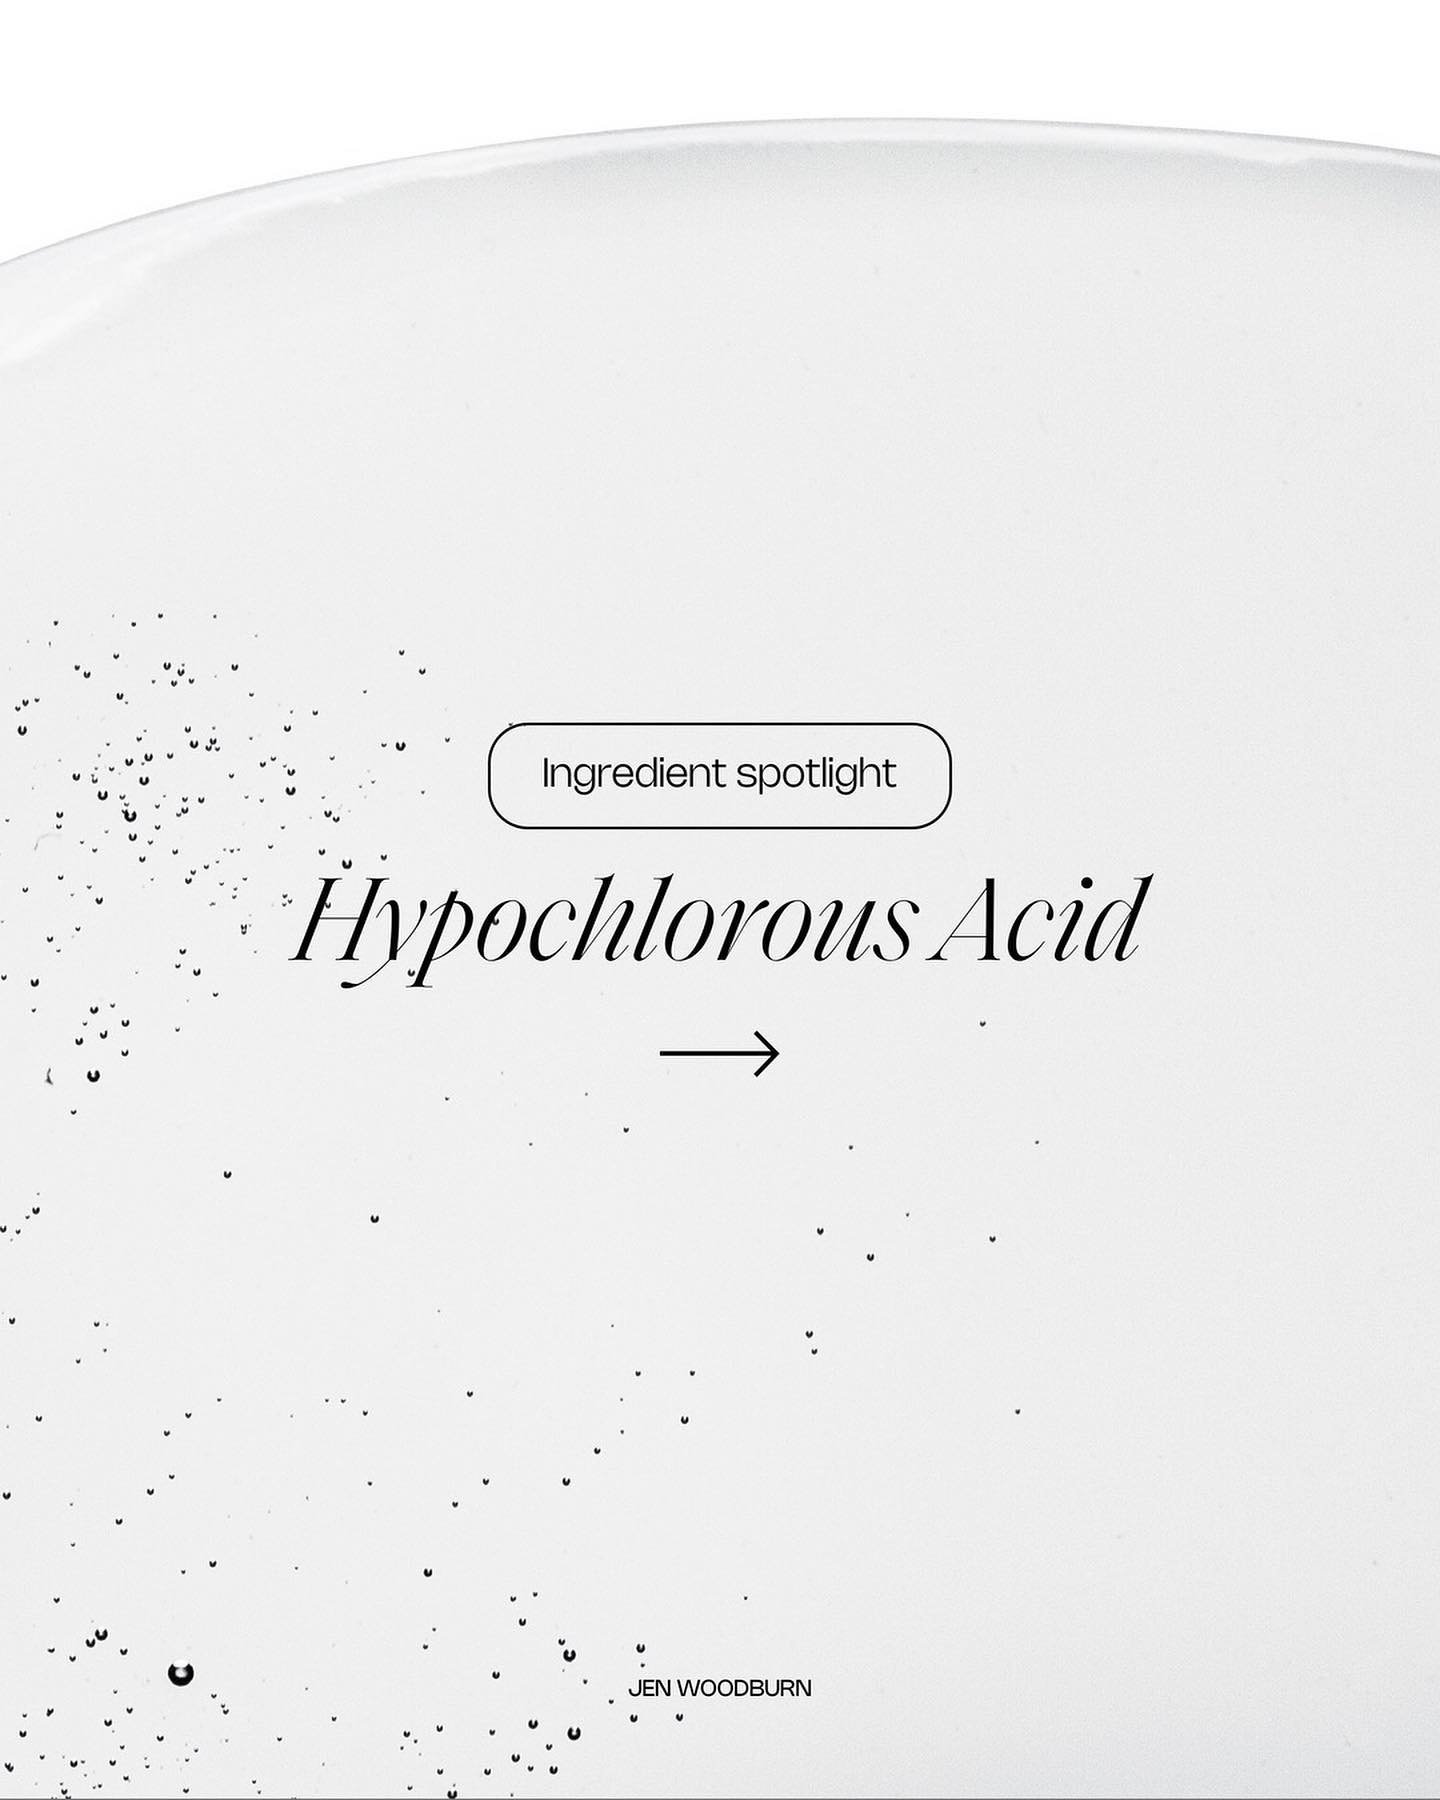 Hypochlorous Acid - the ingredient that everyone needs in their beauty arsenal!!!
⠀⠀⠀⠀⠀⠀⠀⠀⠀
This is an anti-microbial spray for your face. Think of it as hand sanitizer for your face (without any harsh ingredients).
⠀⠀⠀⠀⠀⠀⠀⠀⠀
My favorite hypochlorous